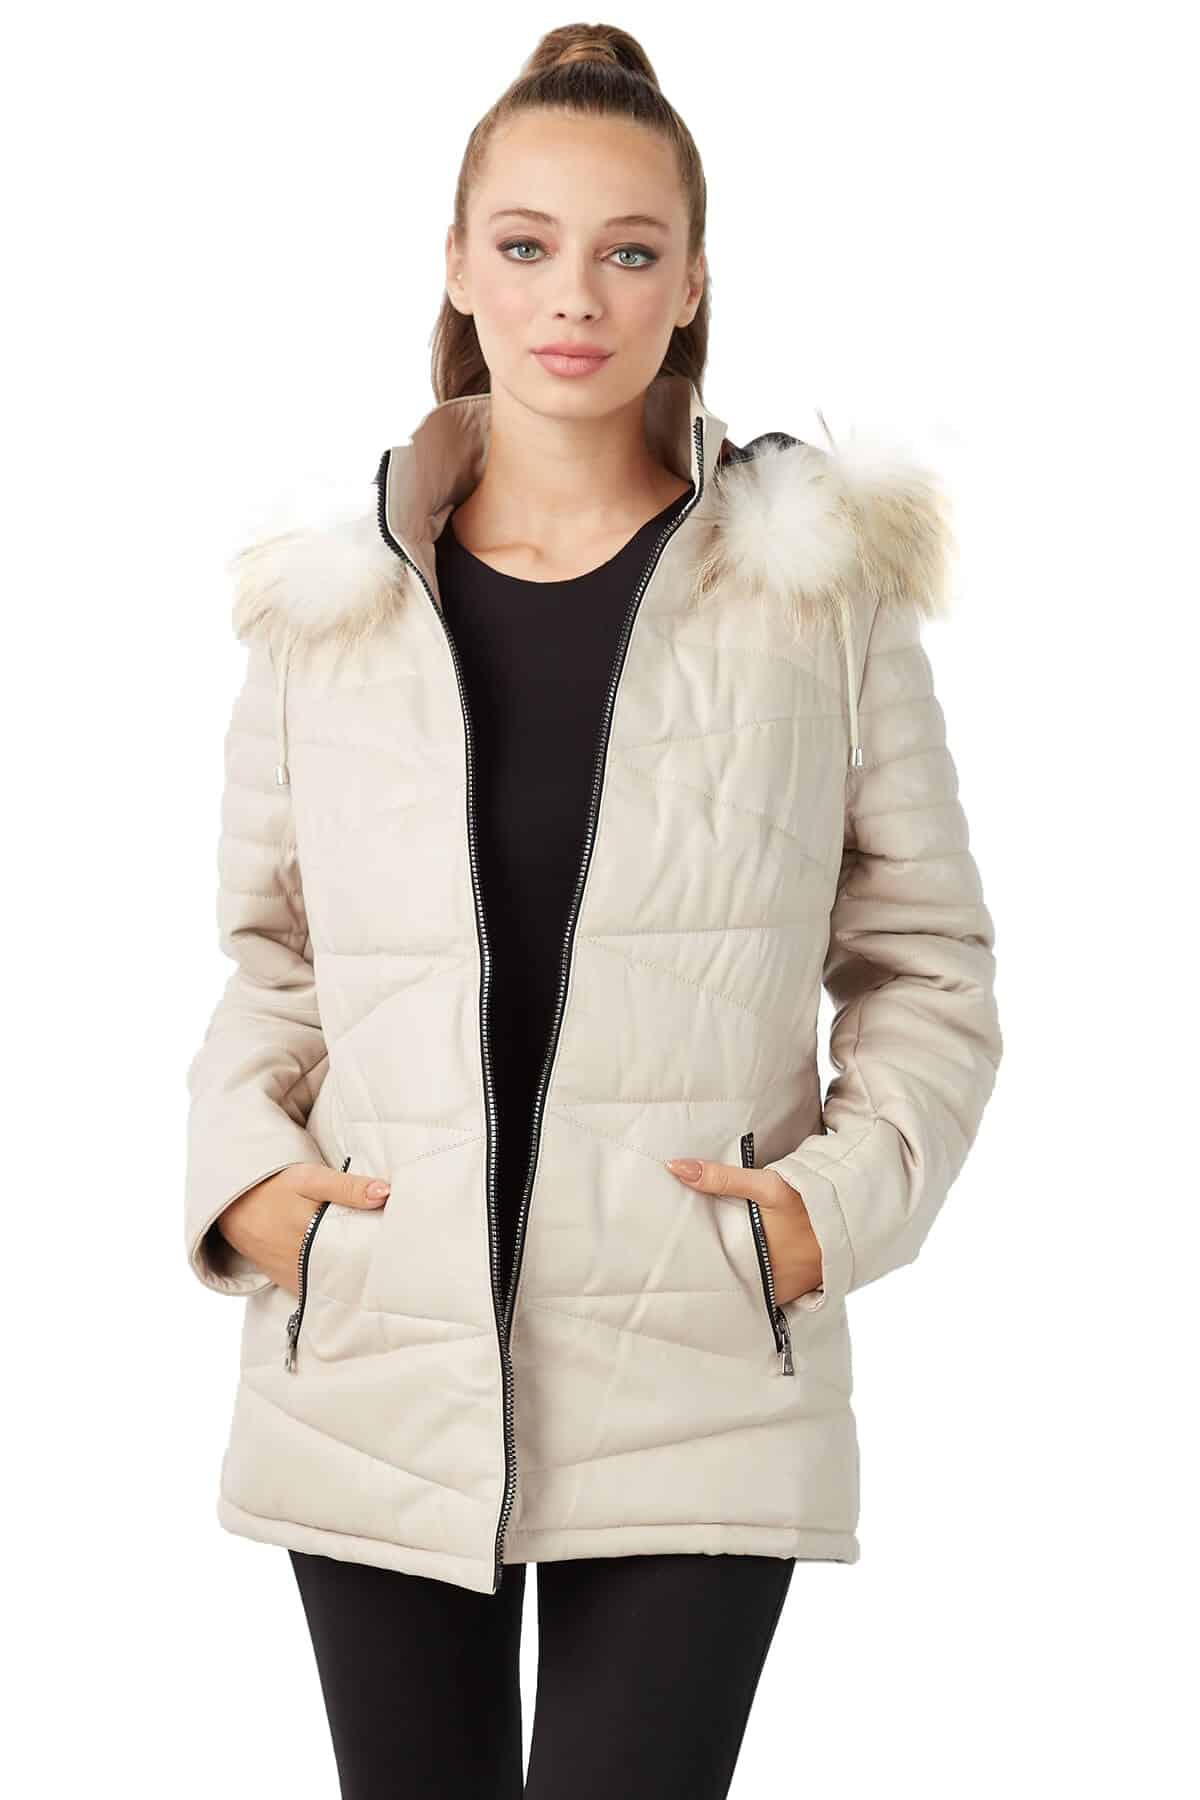 Brown S WOMEN FASHION Jackets Fur Let me try jacket discount 96% 